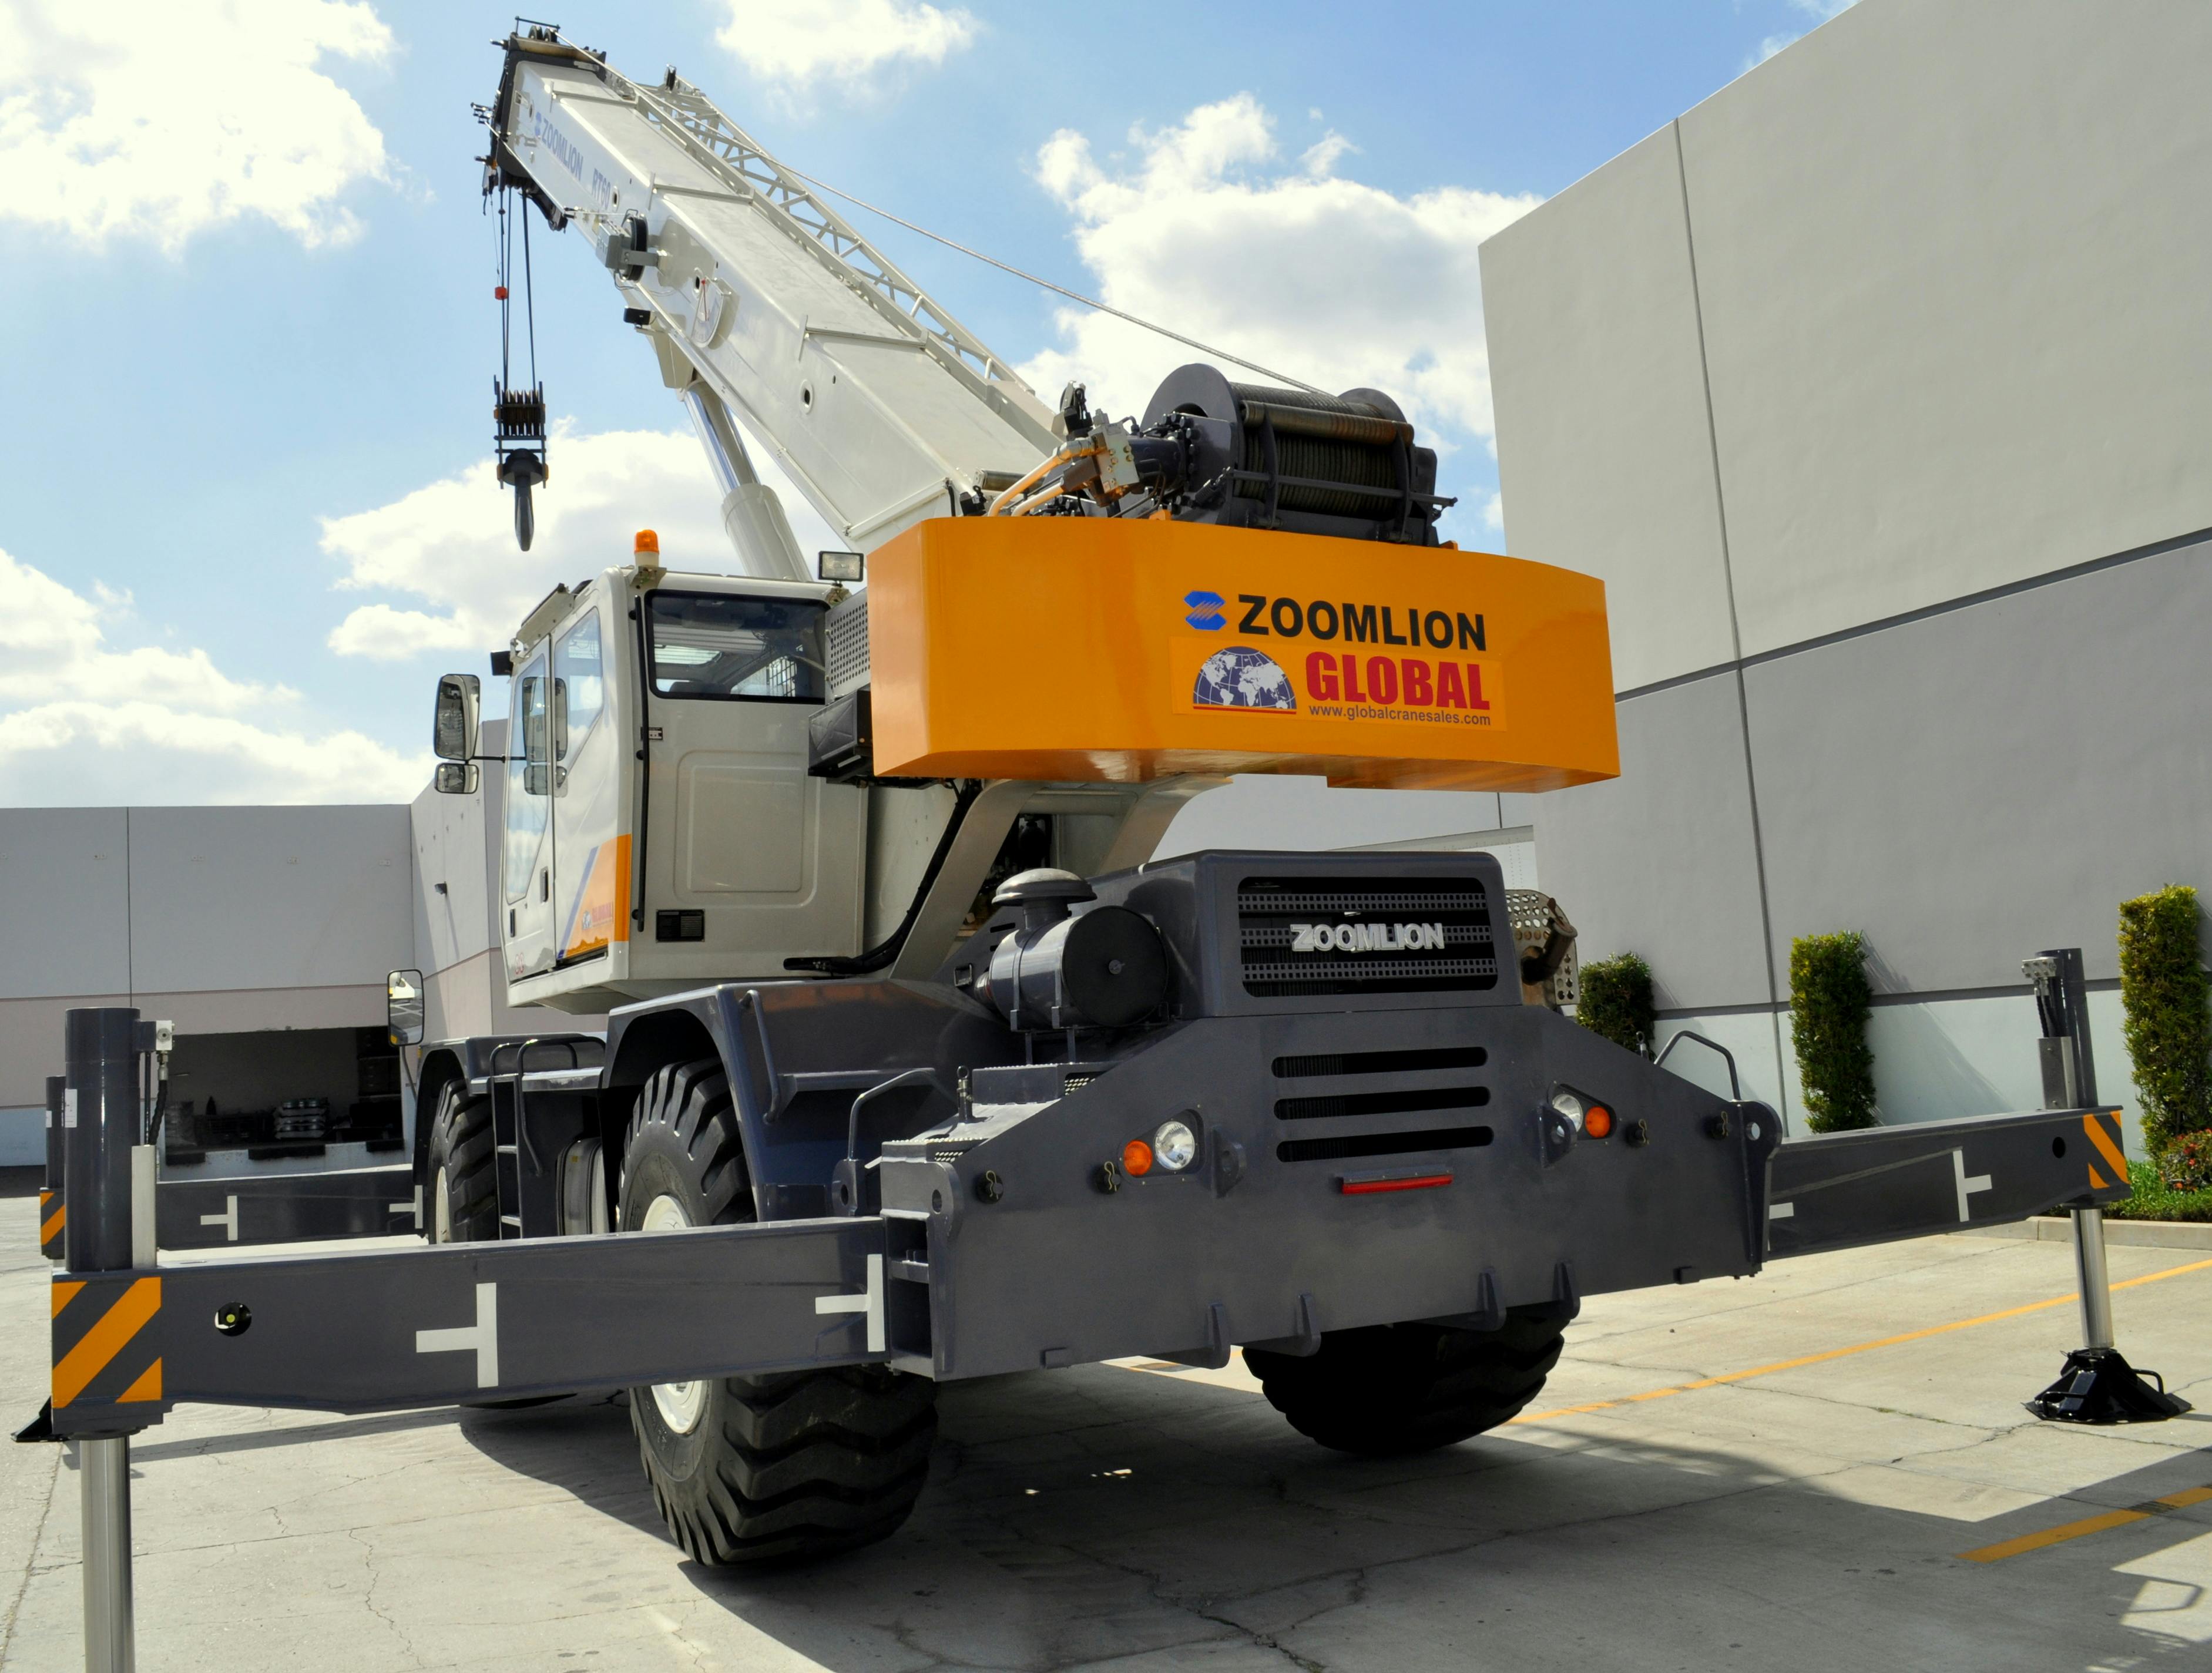 Global Chile Launches With Delivery of First RT55 | Daily Construction News